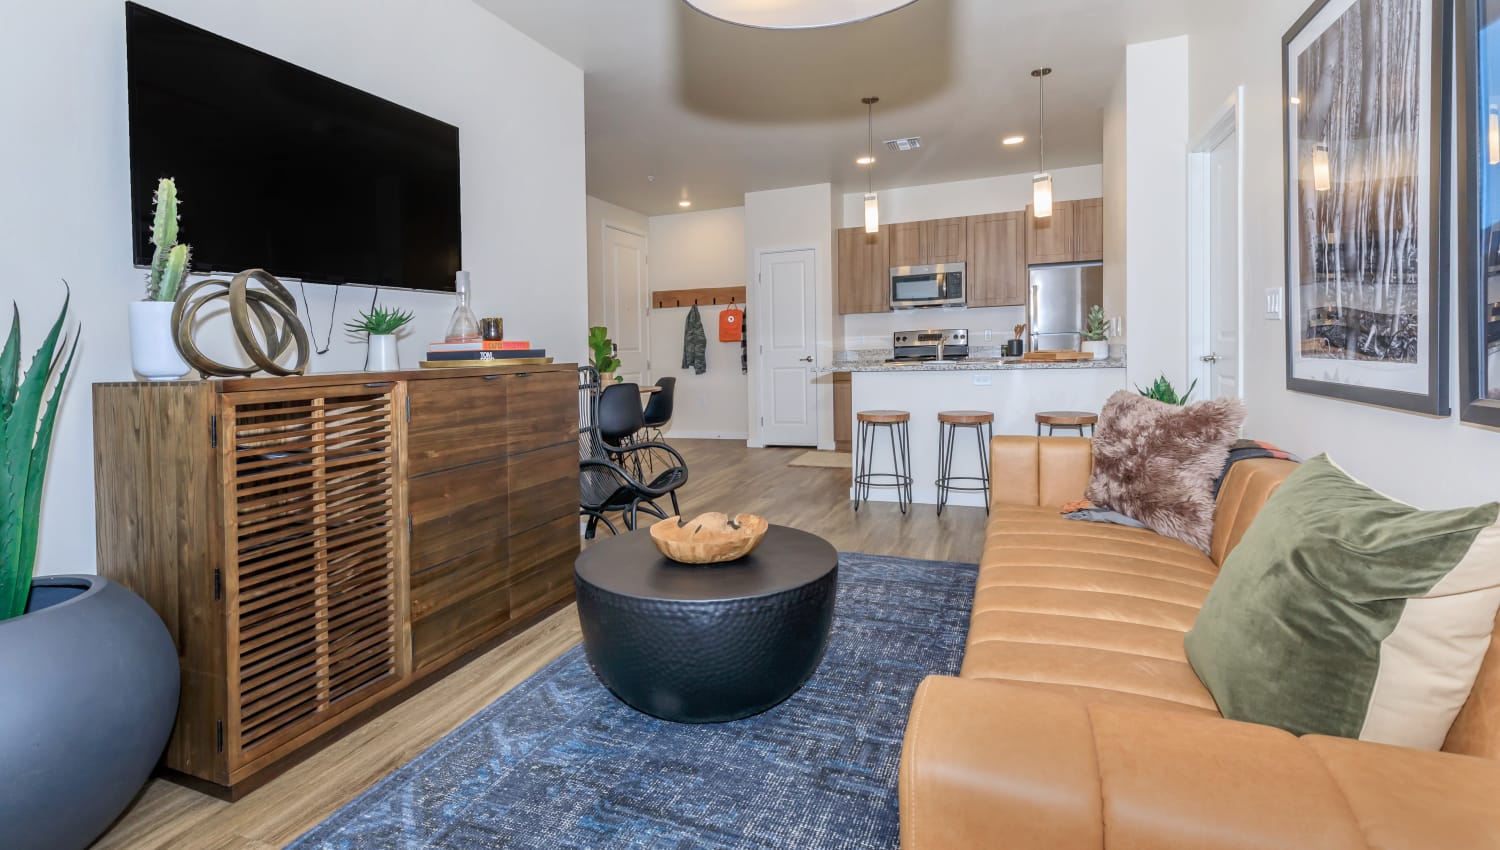 Spacious living room and kitchen at Trailside Apartments in Flagstaff, Arizona